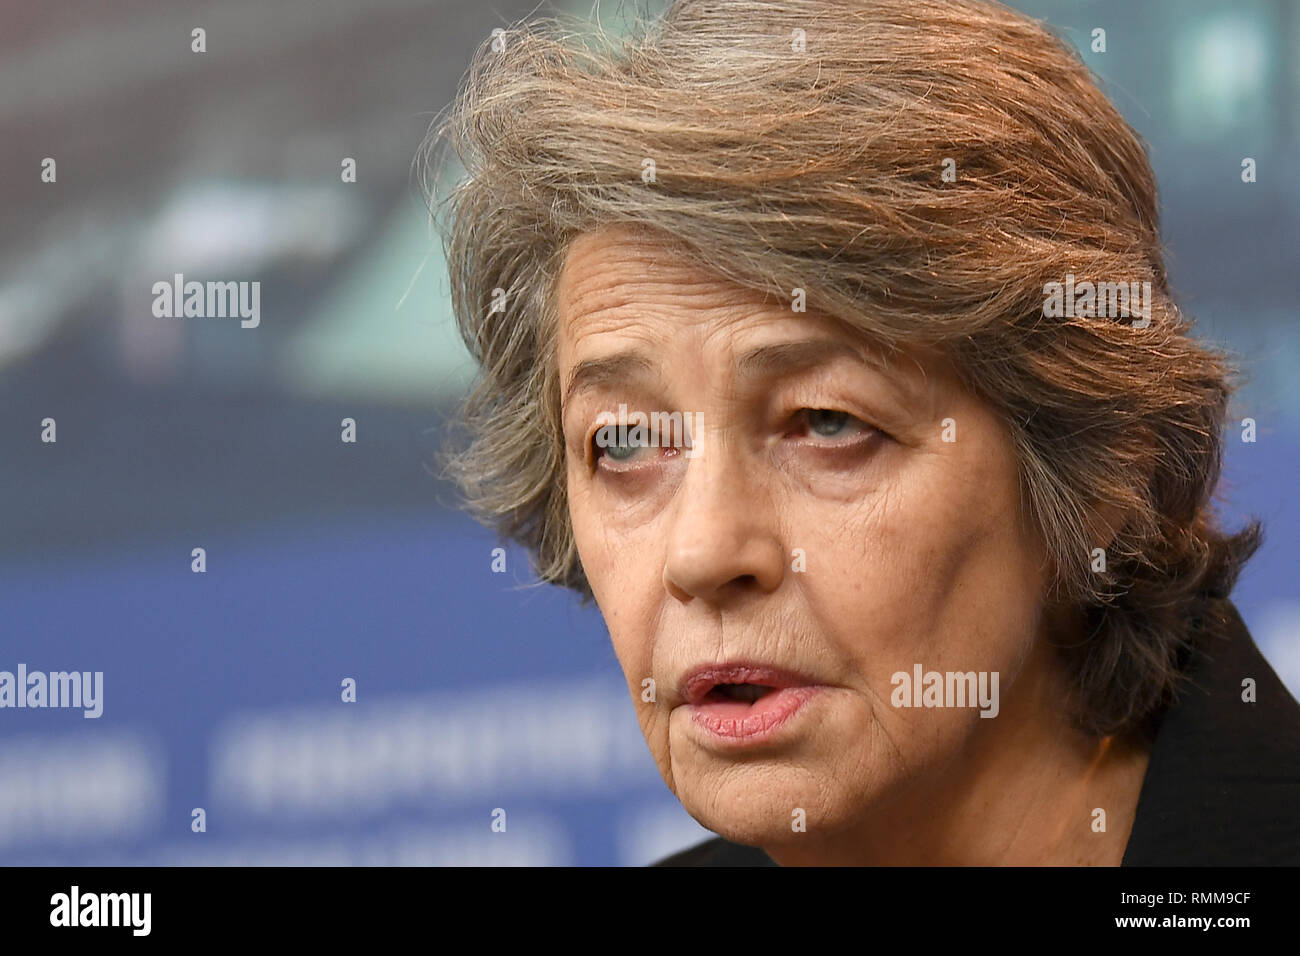 Charlotte Rampling attends the Hommage Charlotte Rampling press conference during the 69th Berlinale International Film Festival. © Paul Treadway Stock Photo